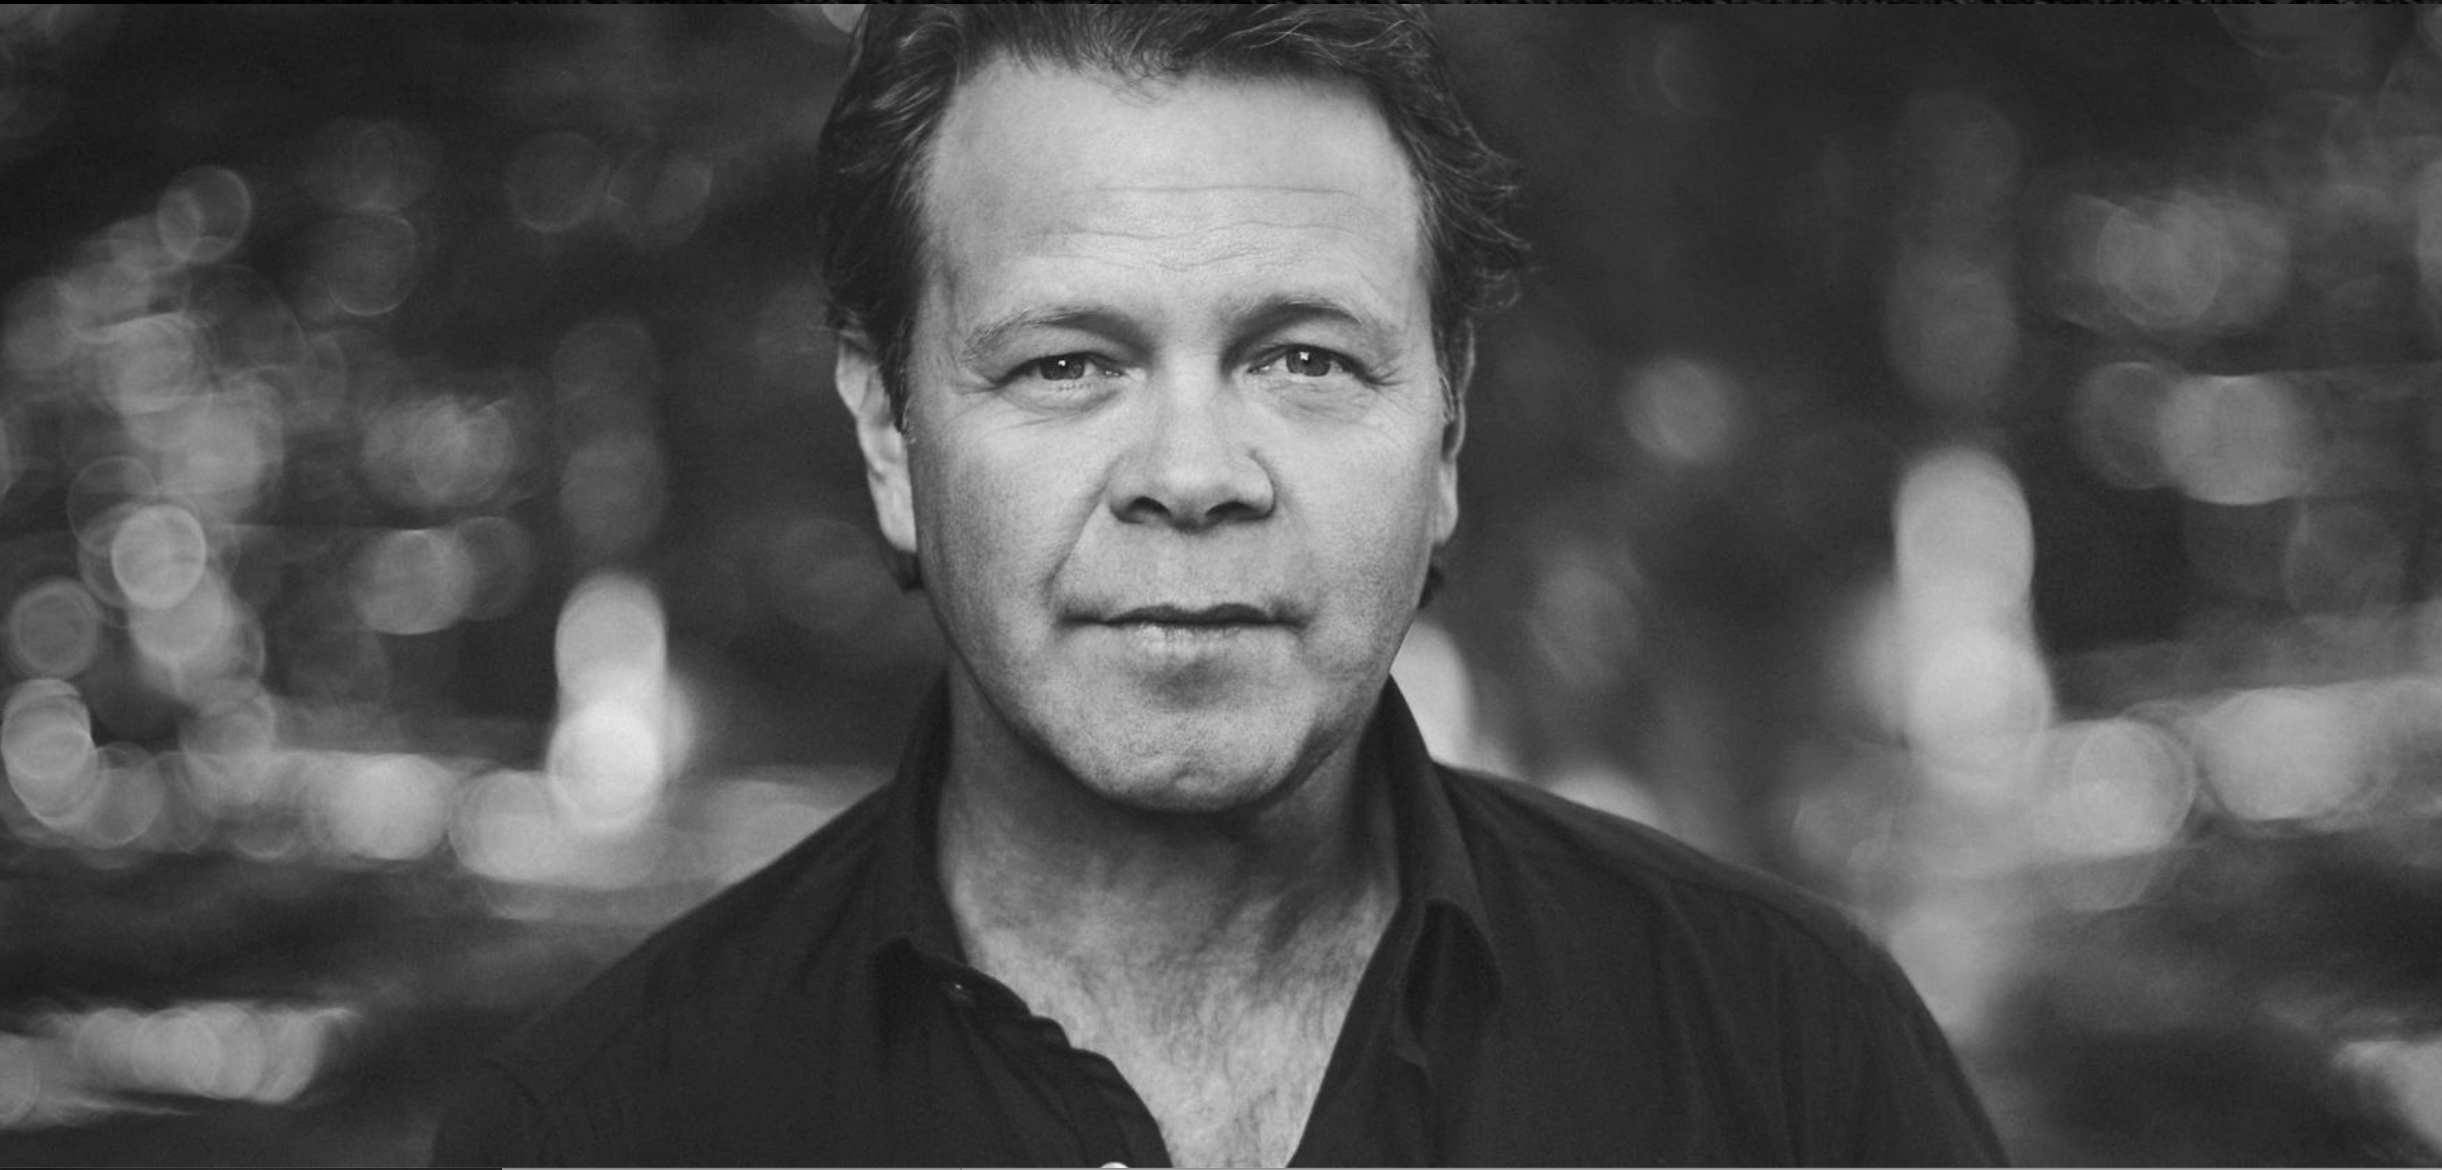 Troy Cassar-Daley is heading to The Imperial Hotel